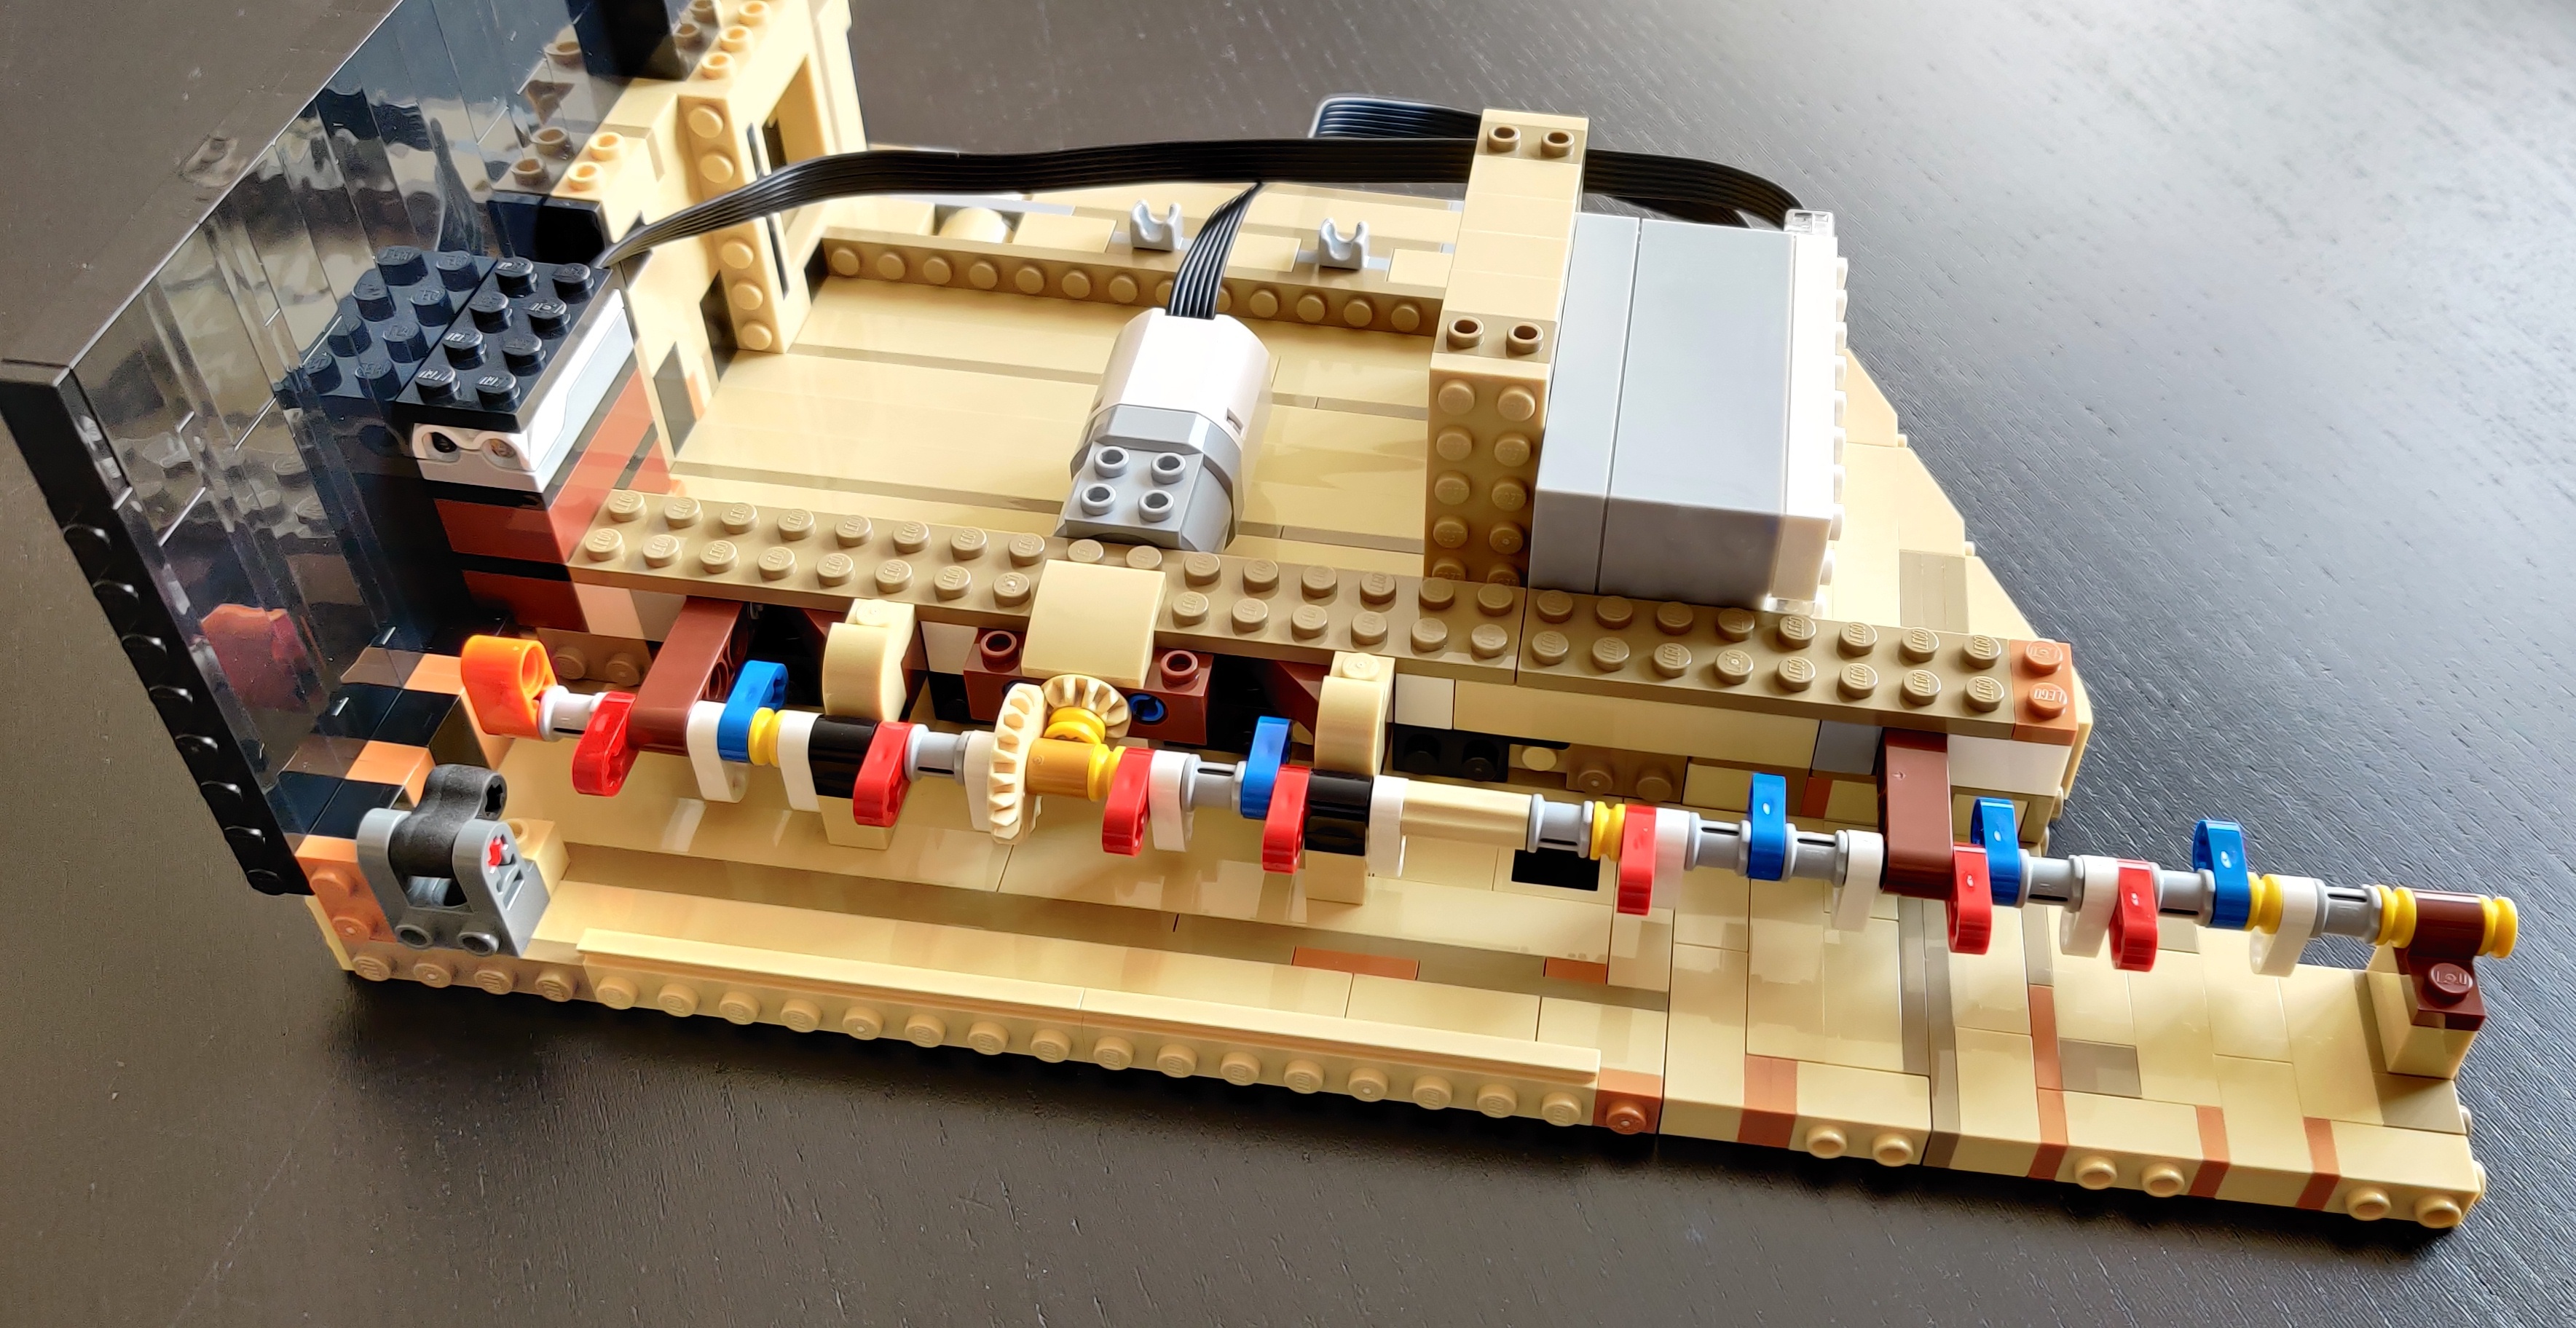 a Lego optical sensor, motor, power&control brick, mounted on
a wide base of sideways pieces; the motor moves a long axle
with many pegs at right angles to each other